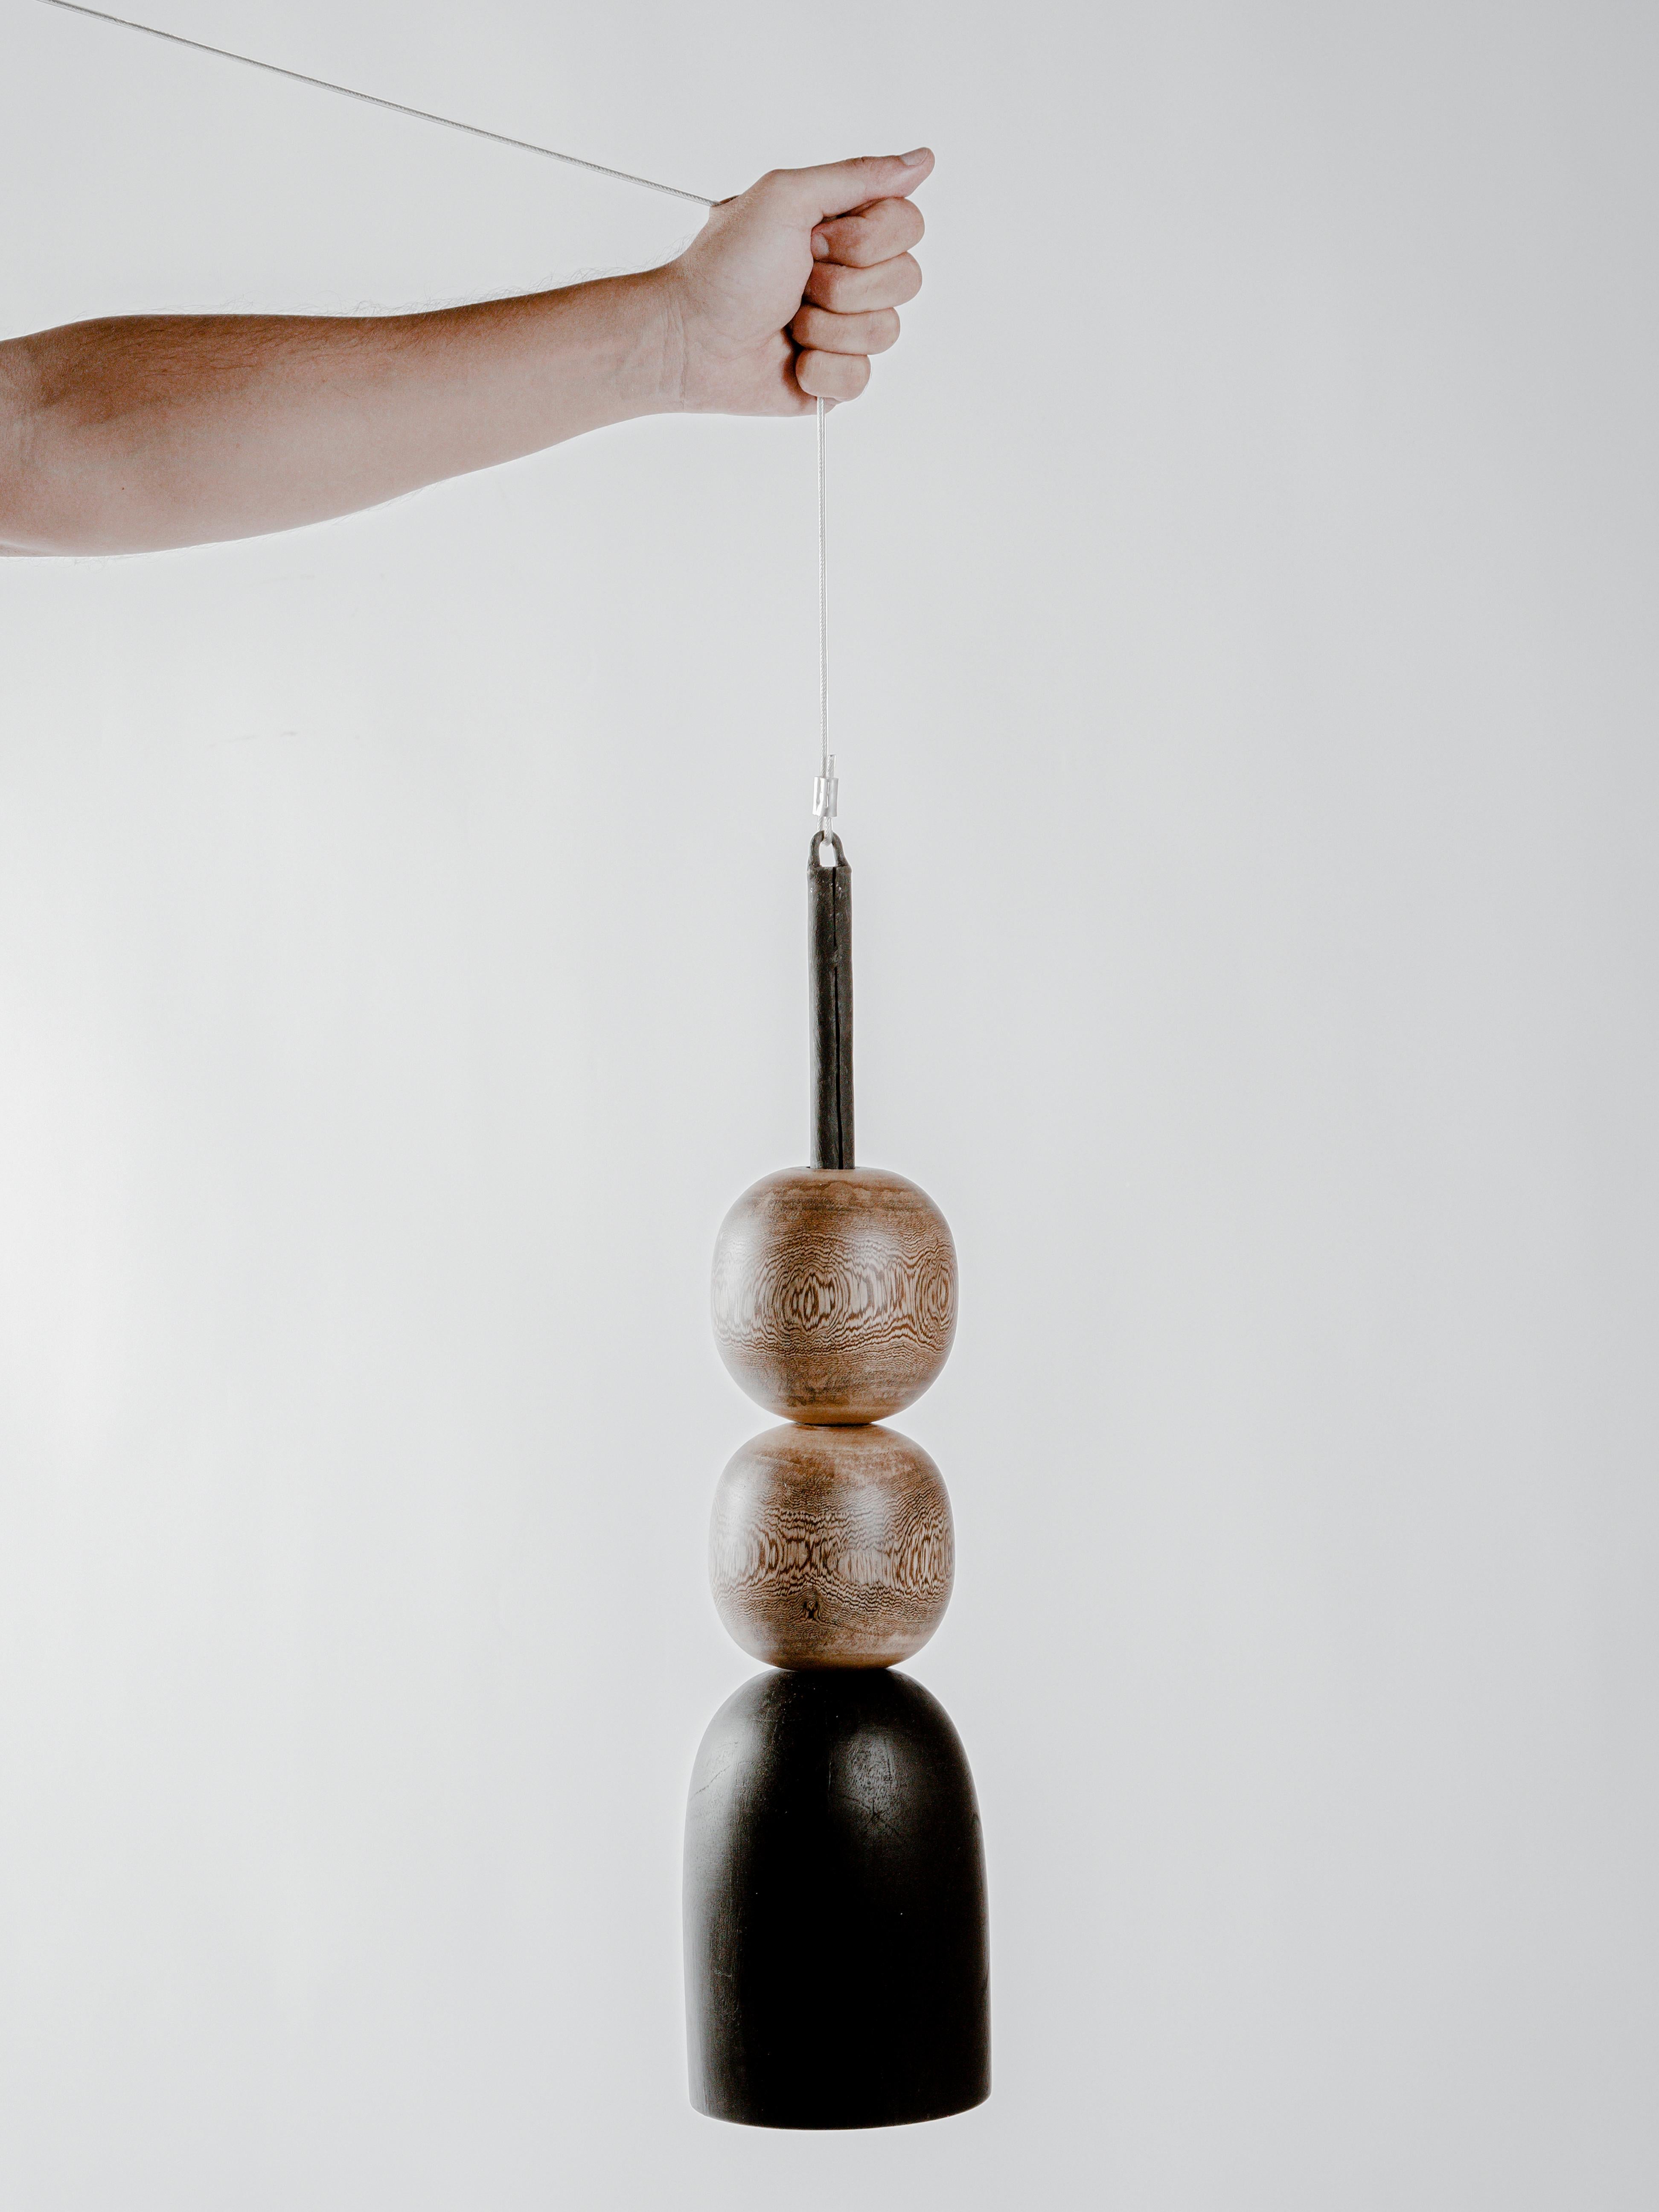 09 Lamp by Daniel Orozco
Dimensions: D 13 x H 40 cm.
Materials: Wood

Black wood -based pendant lamp and 2 natural jabin wood balls. Handmade by Mexican artisans.

All our lamps can be wired according to each country. If sold to the USA it will be